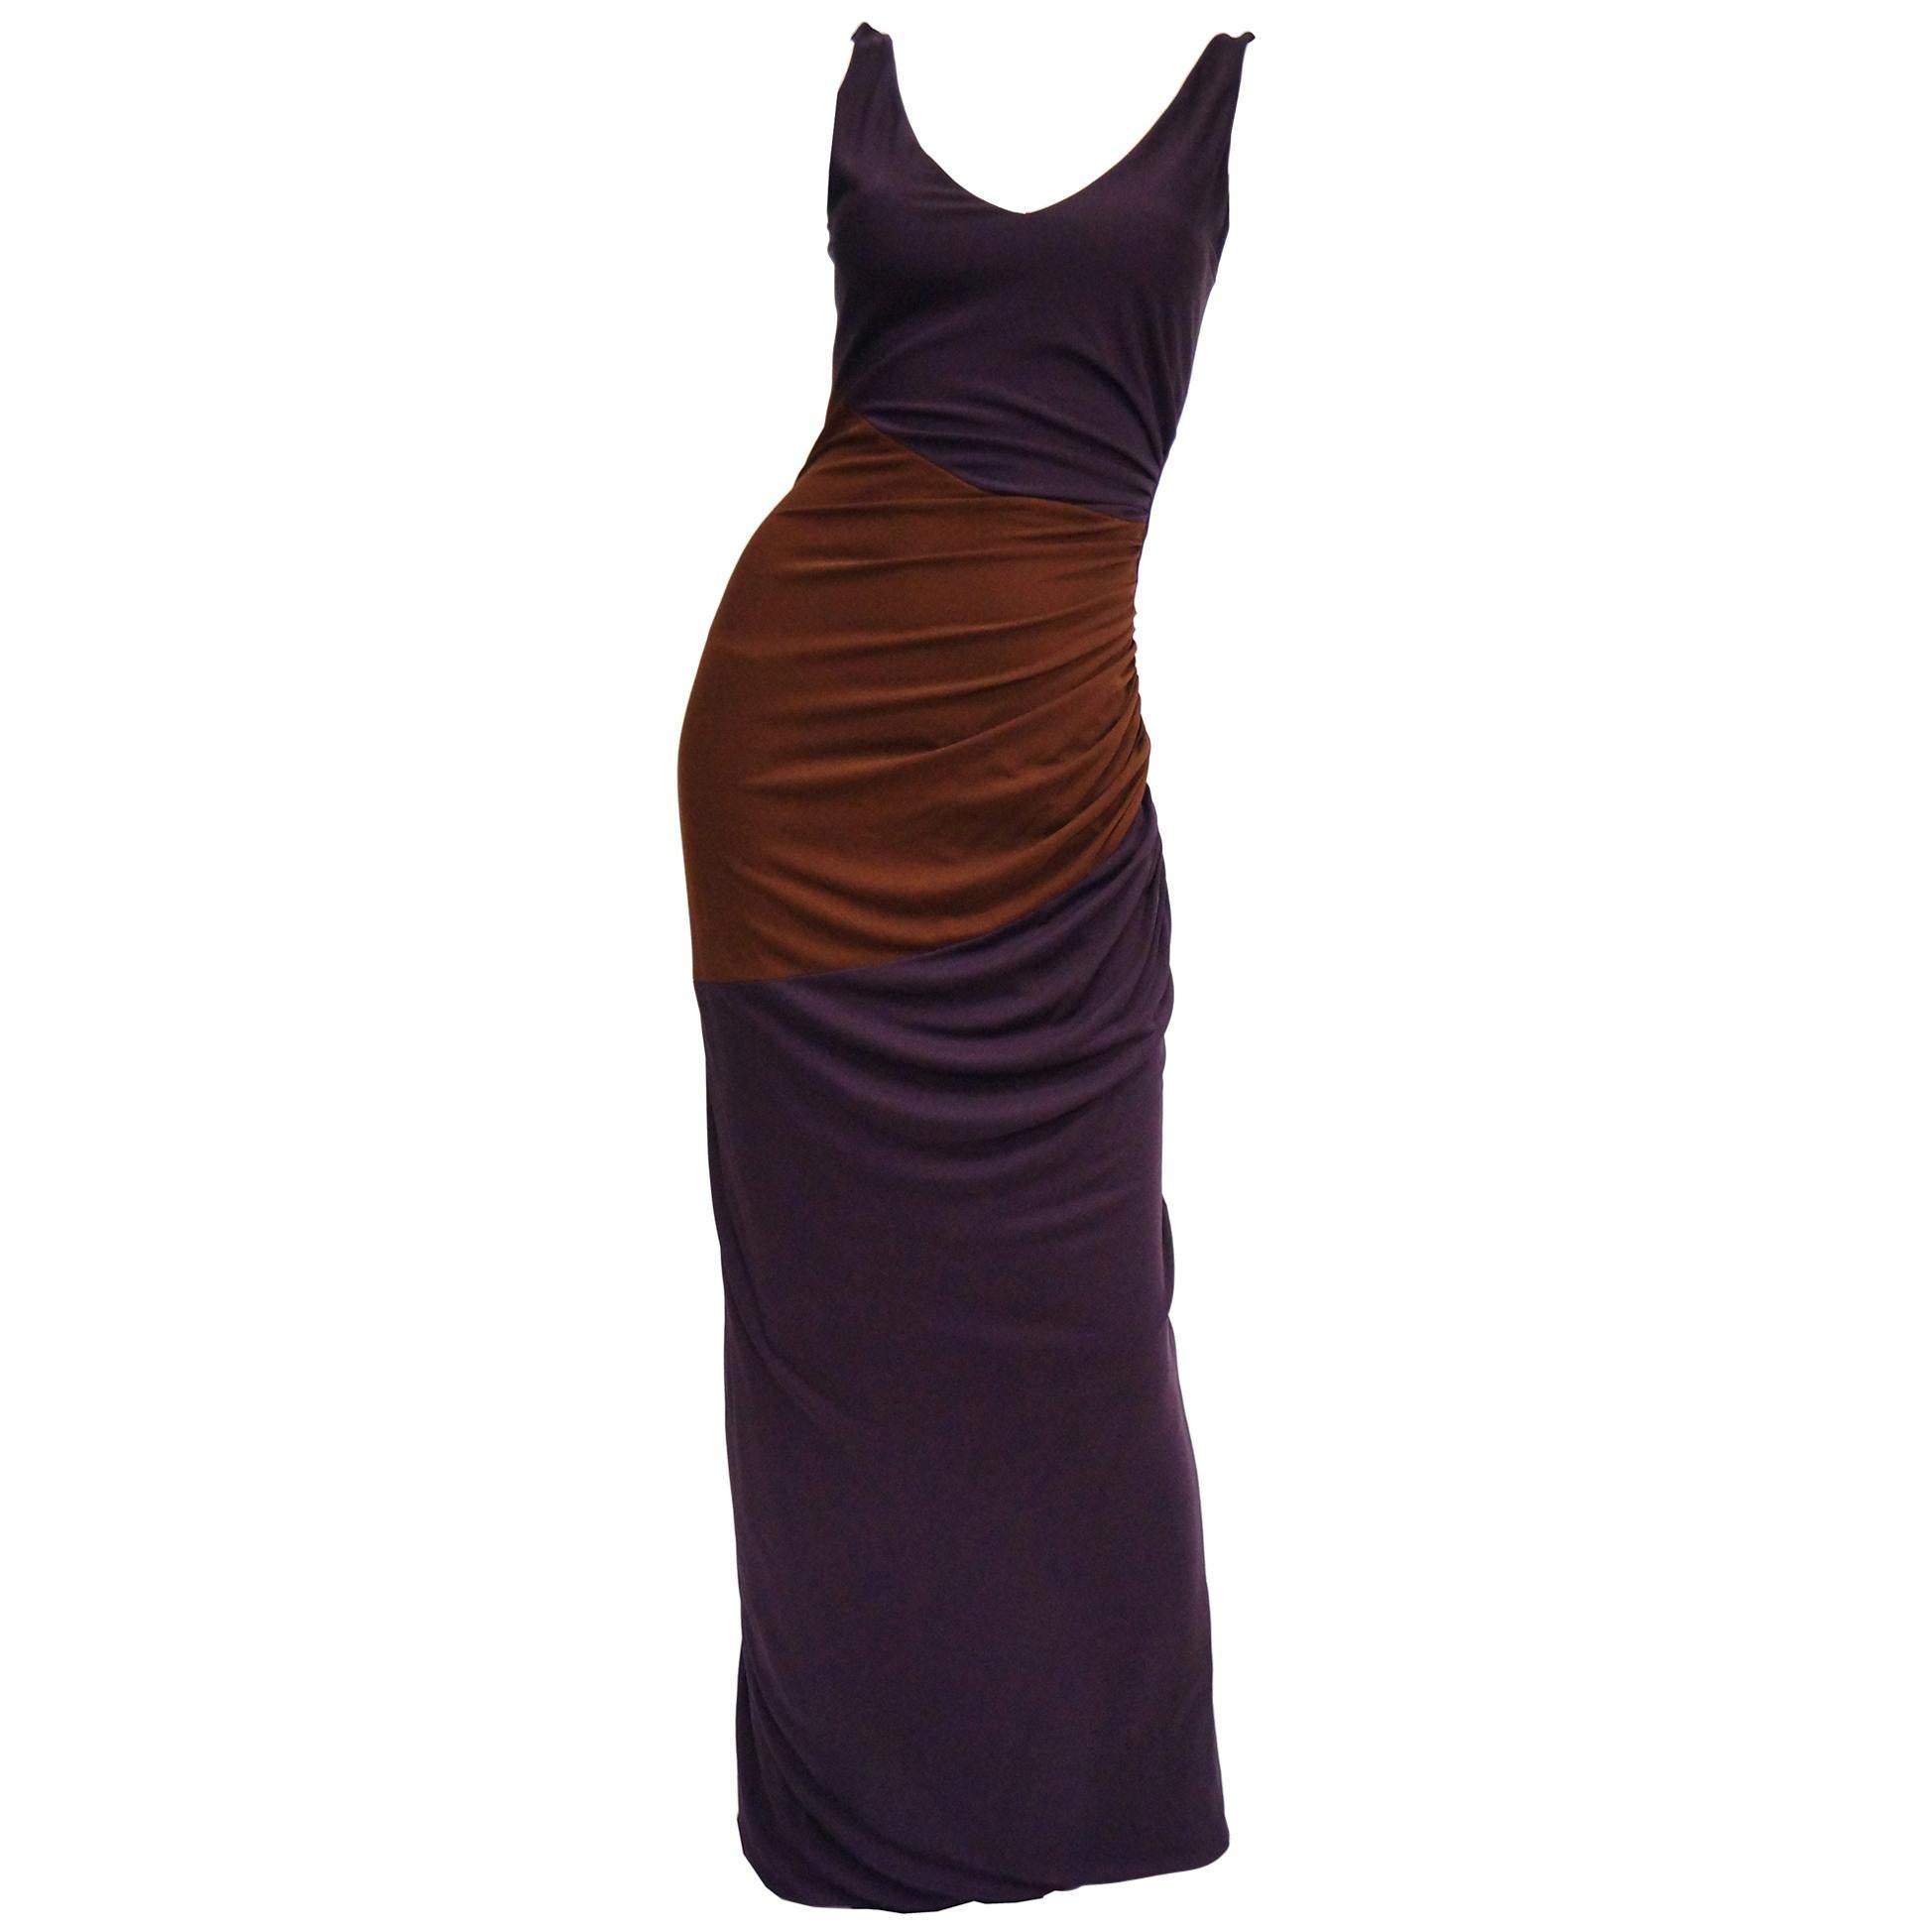 2007 Donald Deal Aubergine and Ginger Colorblock Drape Bodycon Evening Dress For Sale